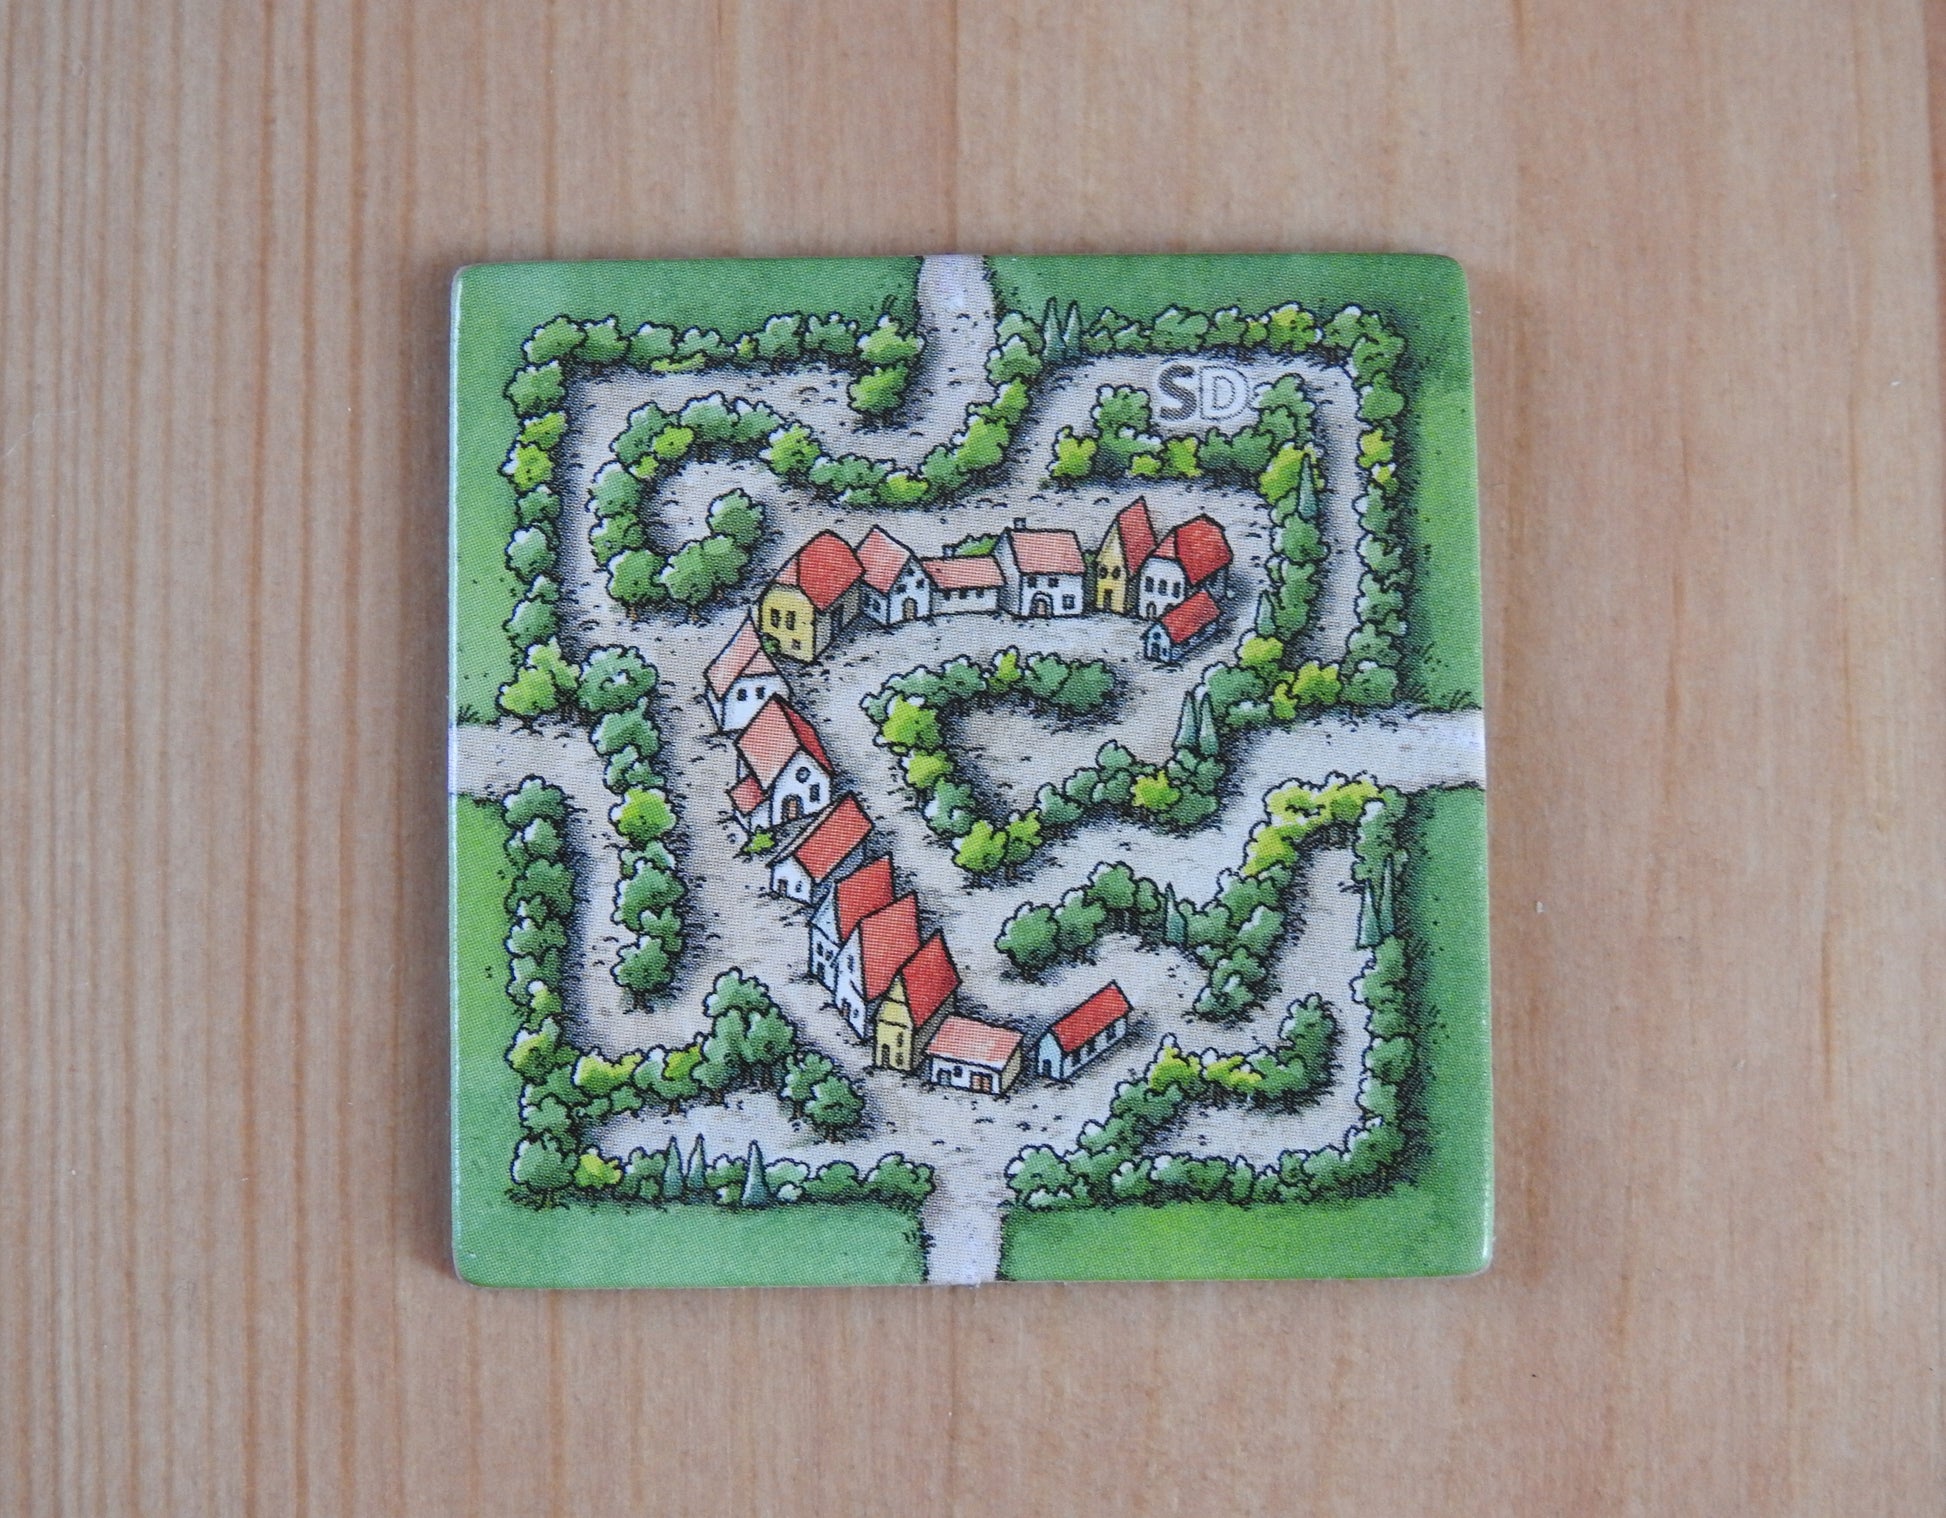 View of the Labryinth (Classic Edition) tile for this Carcassonne mini expansion.